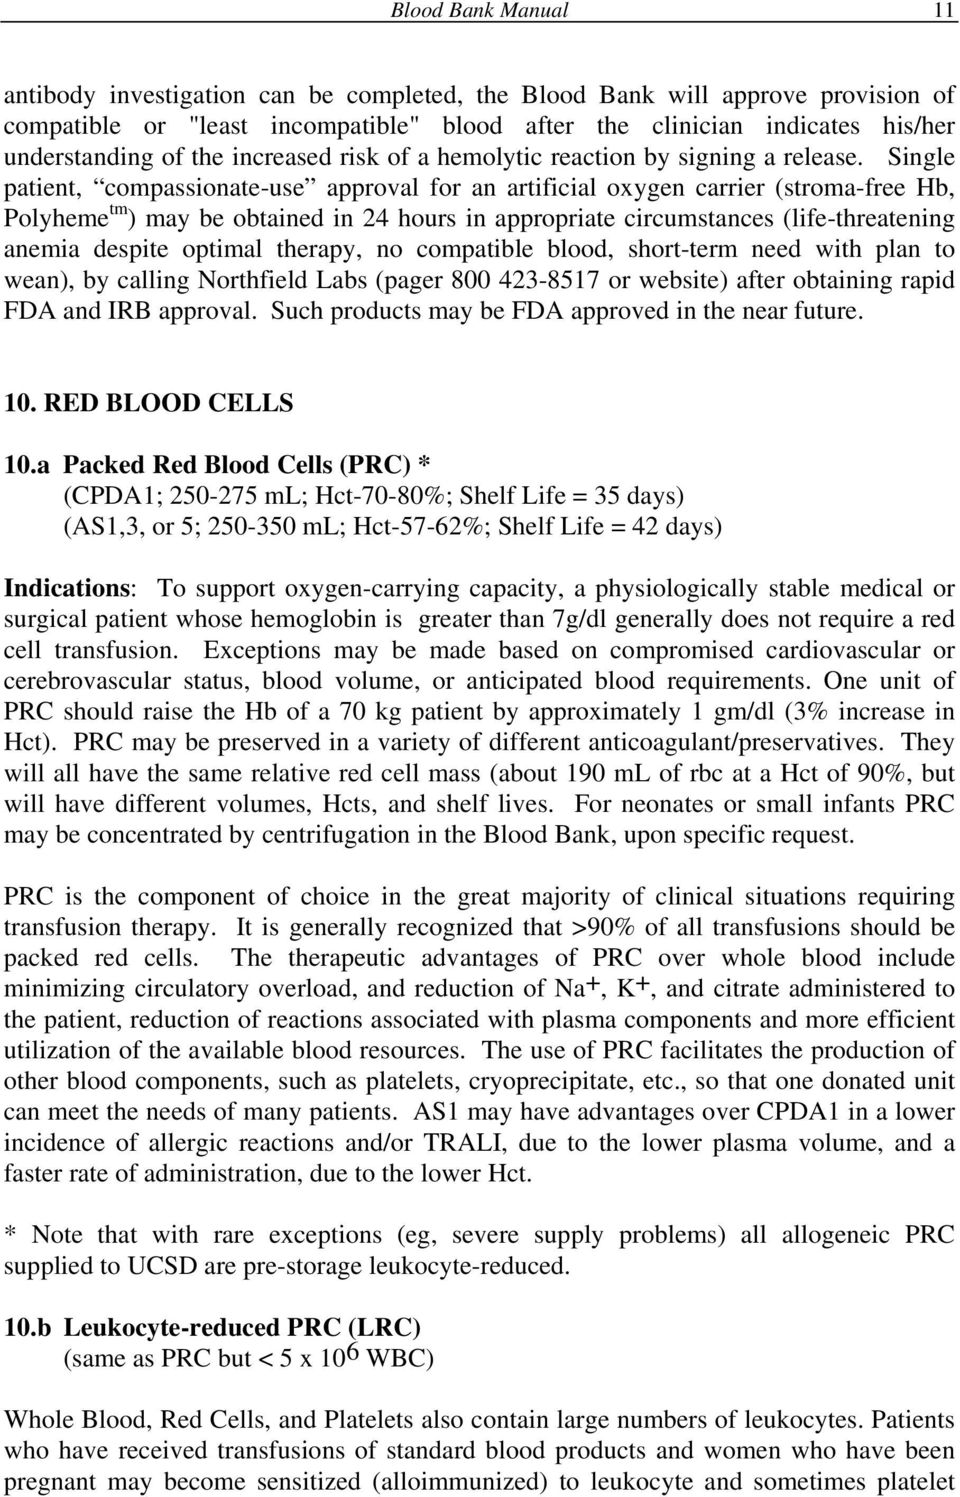 Single patient, compassionate-use approval for an artificial oxygen carrier (stroma-free Hb, Polyheme tm ) may be obtained in 24 hours in appropriate circumstances (life-threatening anemia despite